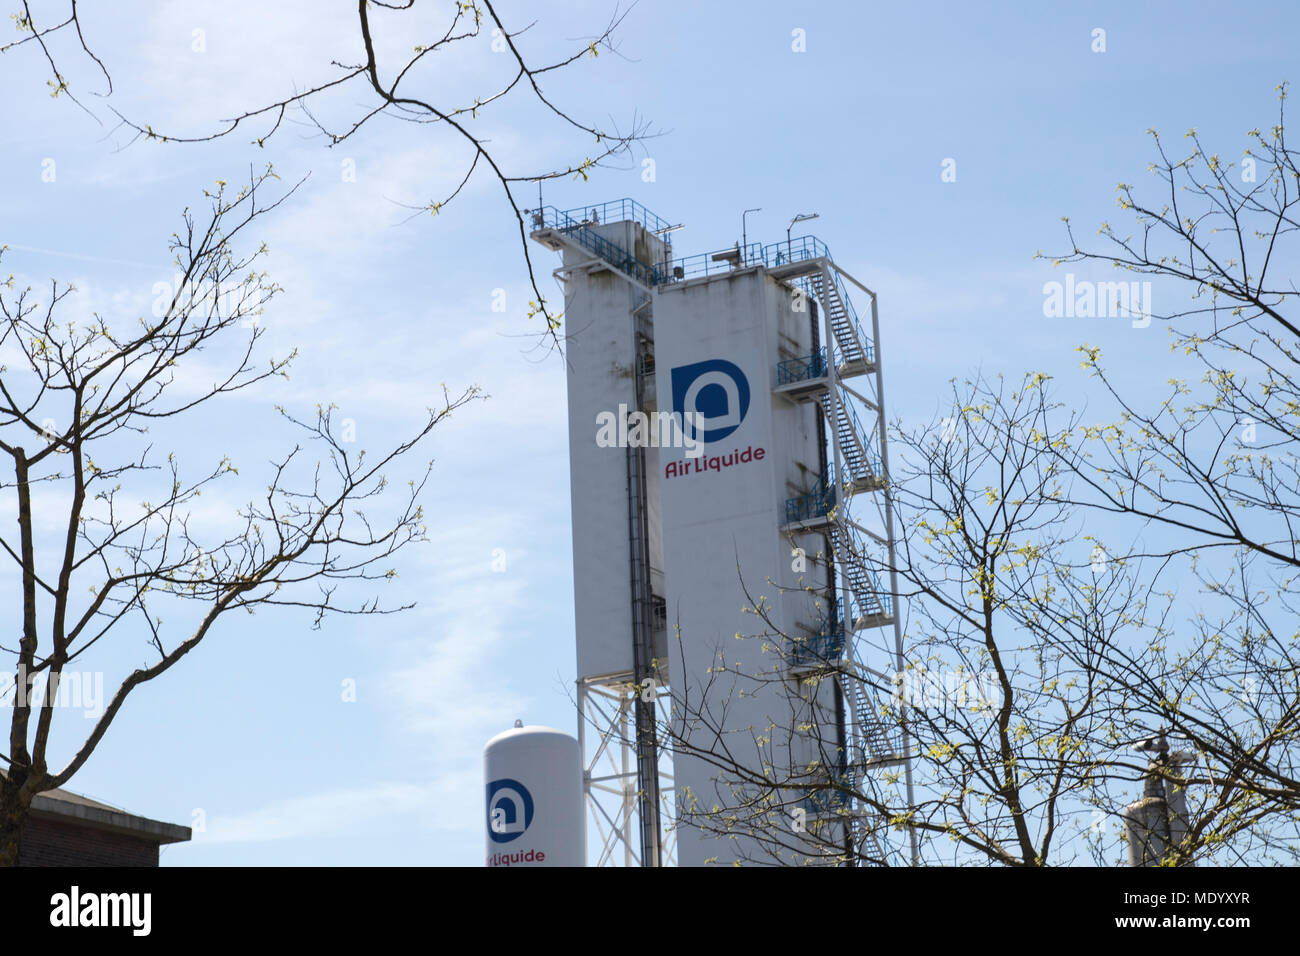 Dortmund, Ruhr Area, North Rhine Westphalia ,Germany - April 16 2018: French multinational company Air Liquide which supplies industrial gases Stock Photo